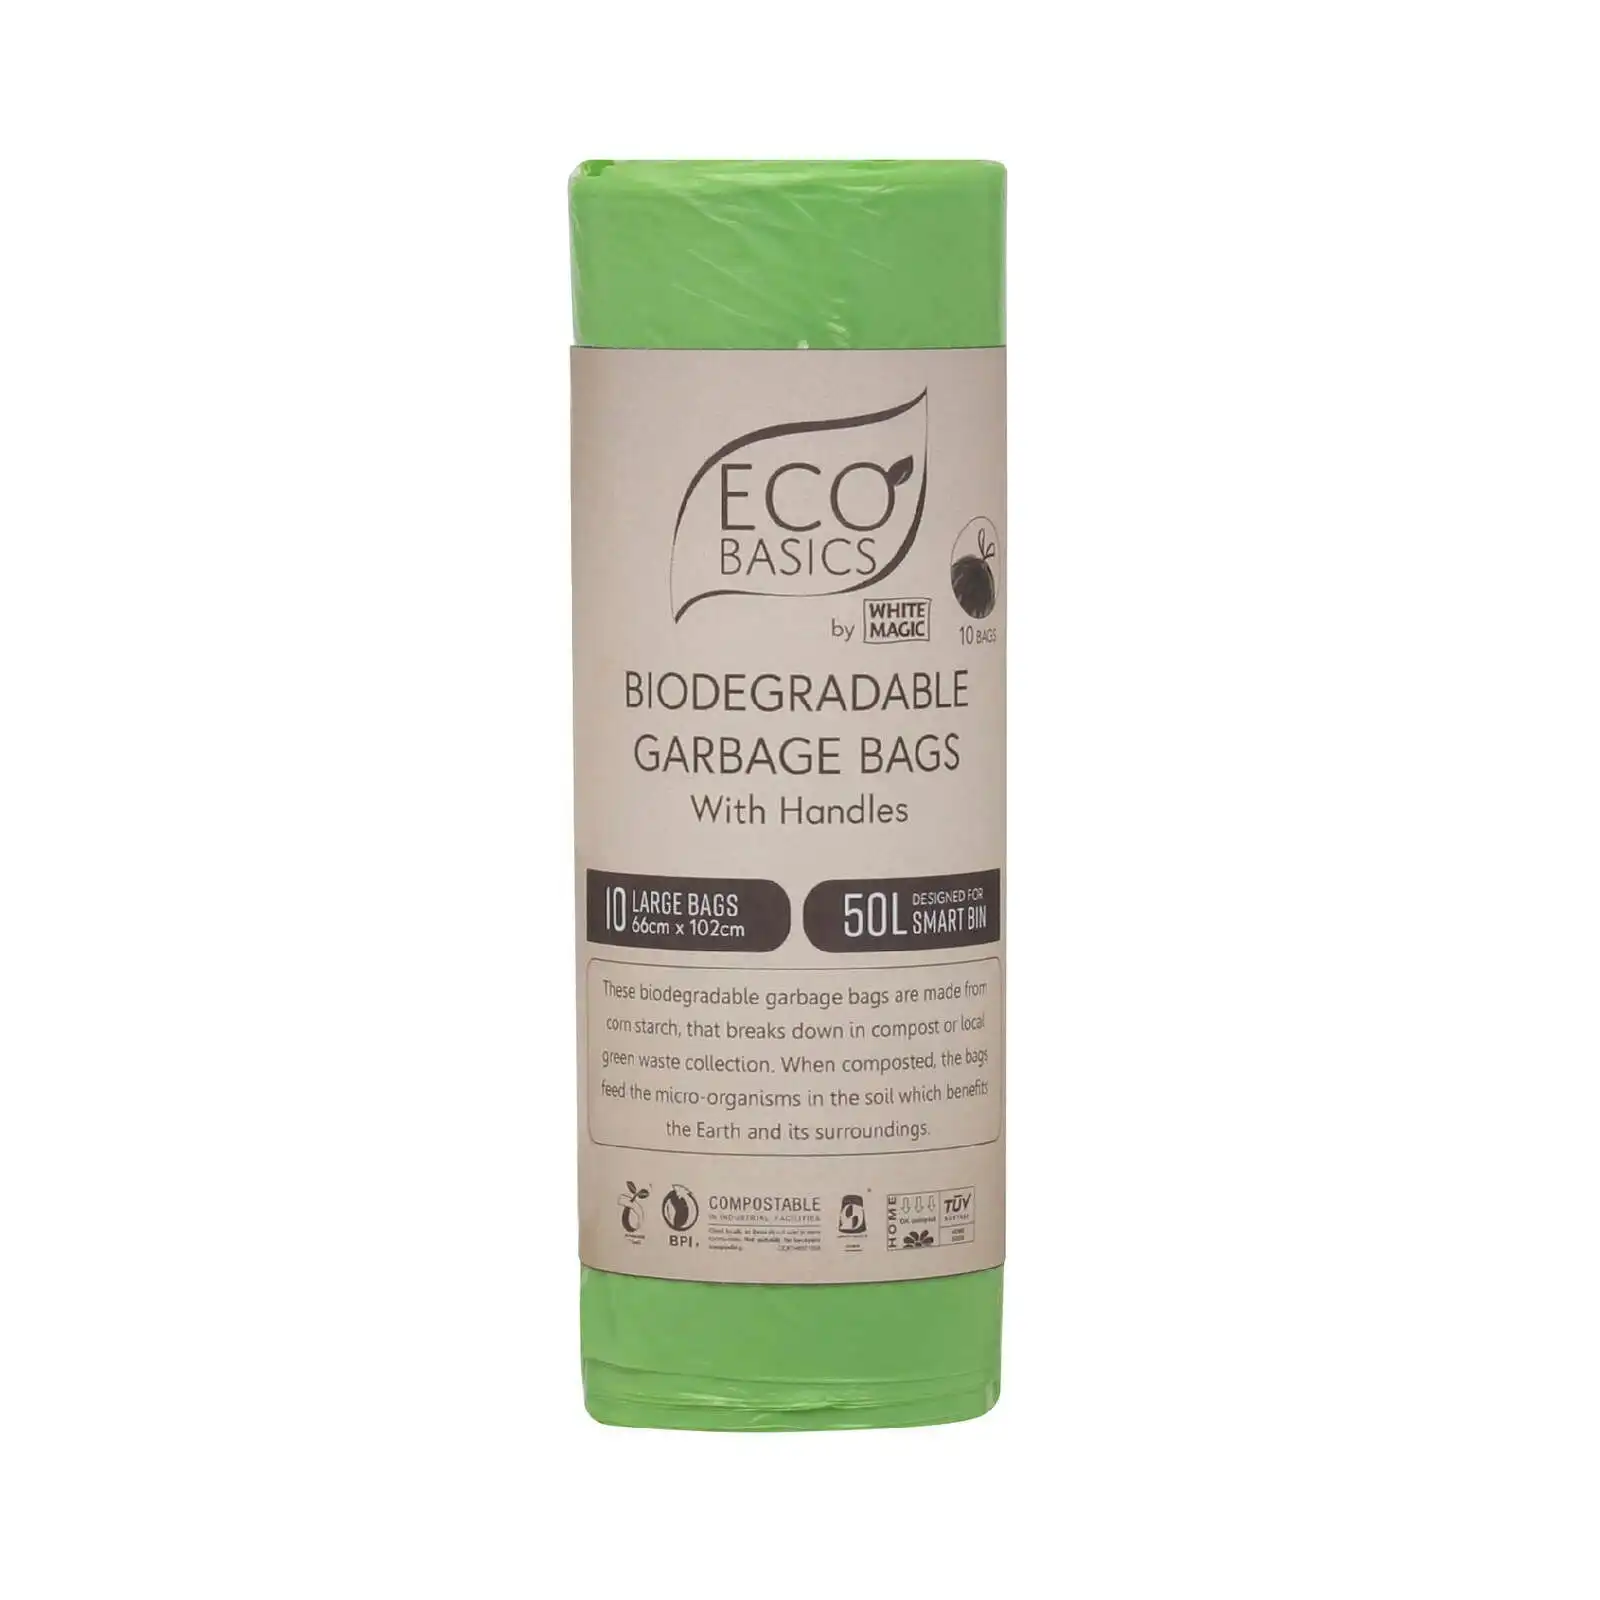 Eco Basics 50L Large Biodegradable Garbage Bags Waste Storage Container Green